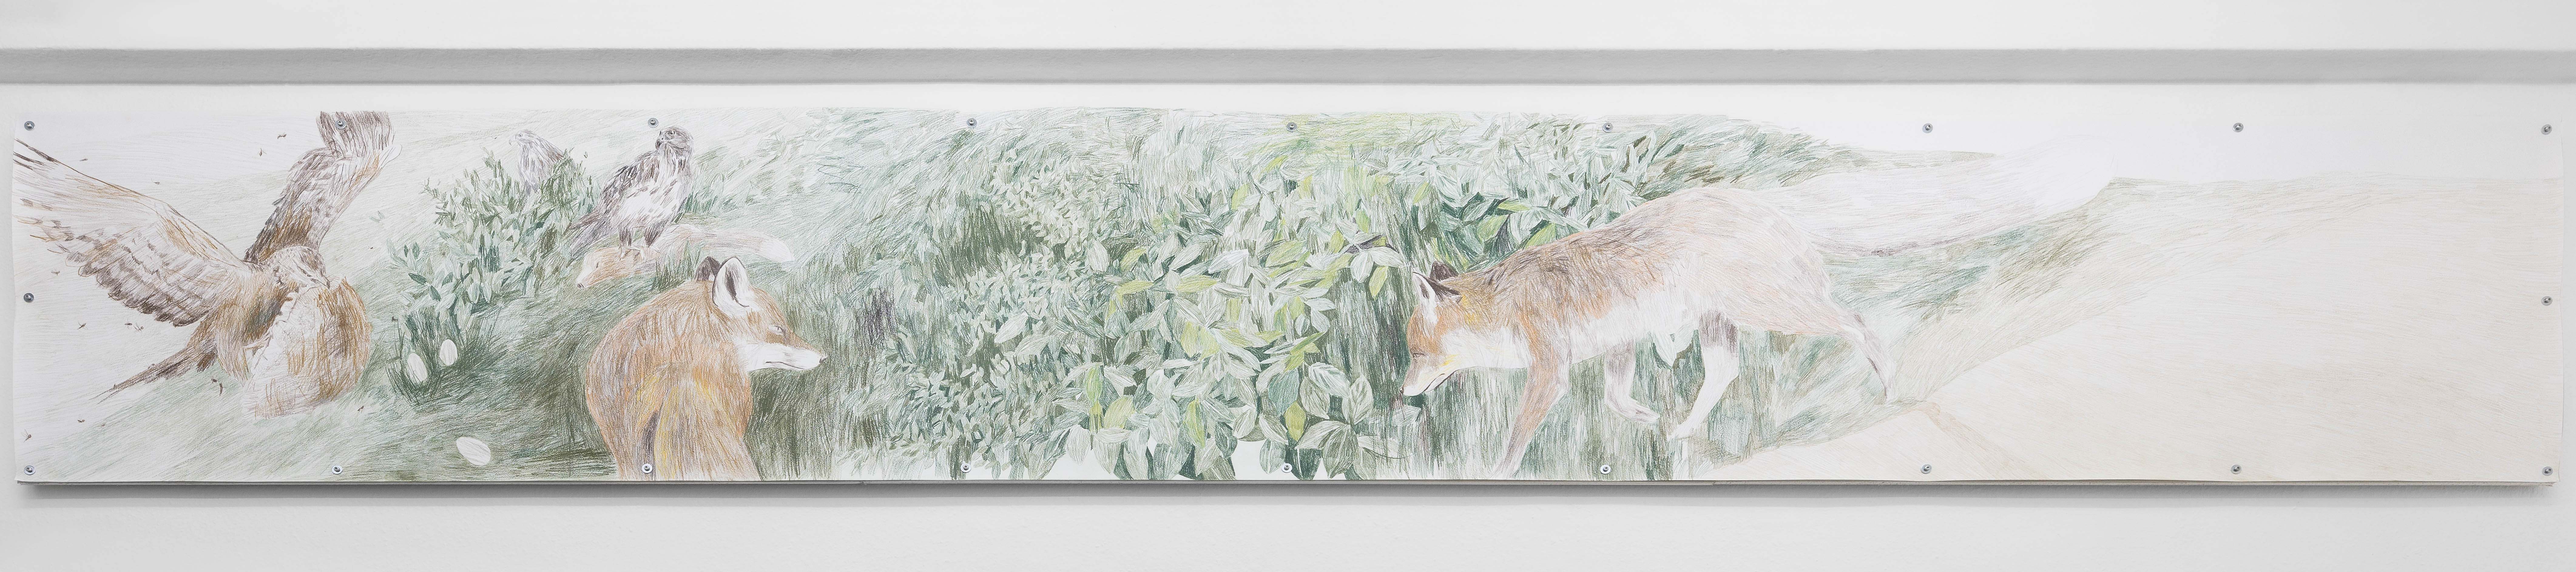 Agnese Galiotto, Of foxes and birds. Stories from the hill. (East), 2023, Crayon on paper on drywall mount, 360cm x 60cm